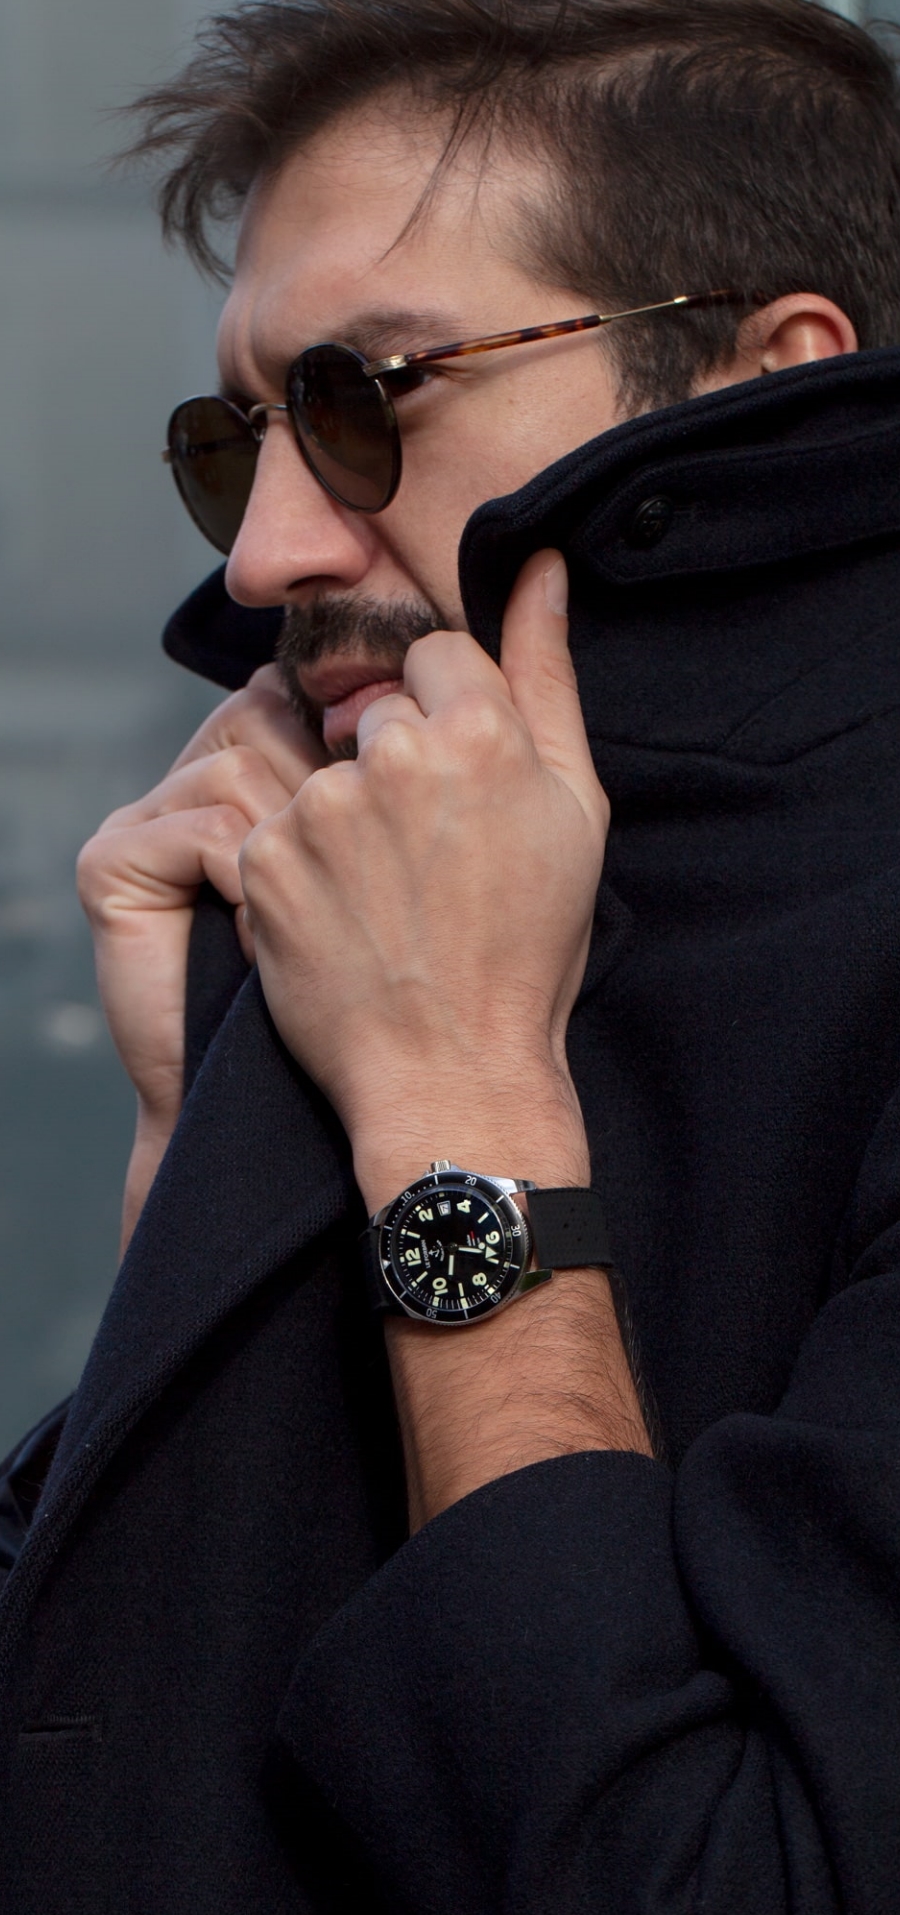 Focus of the watch on a wrist